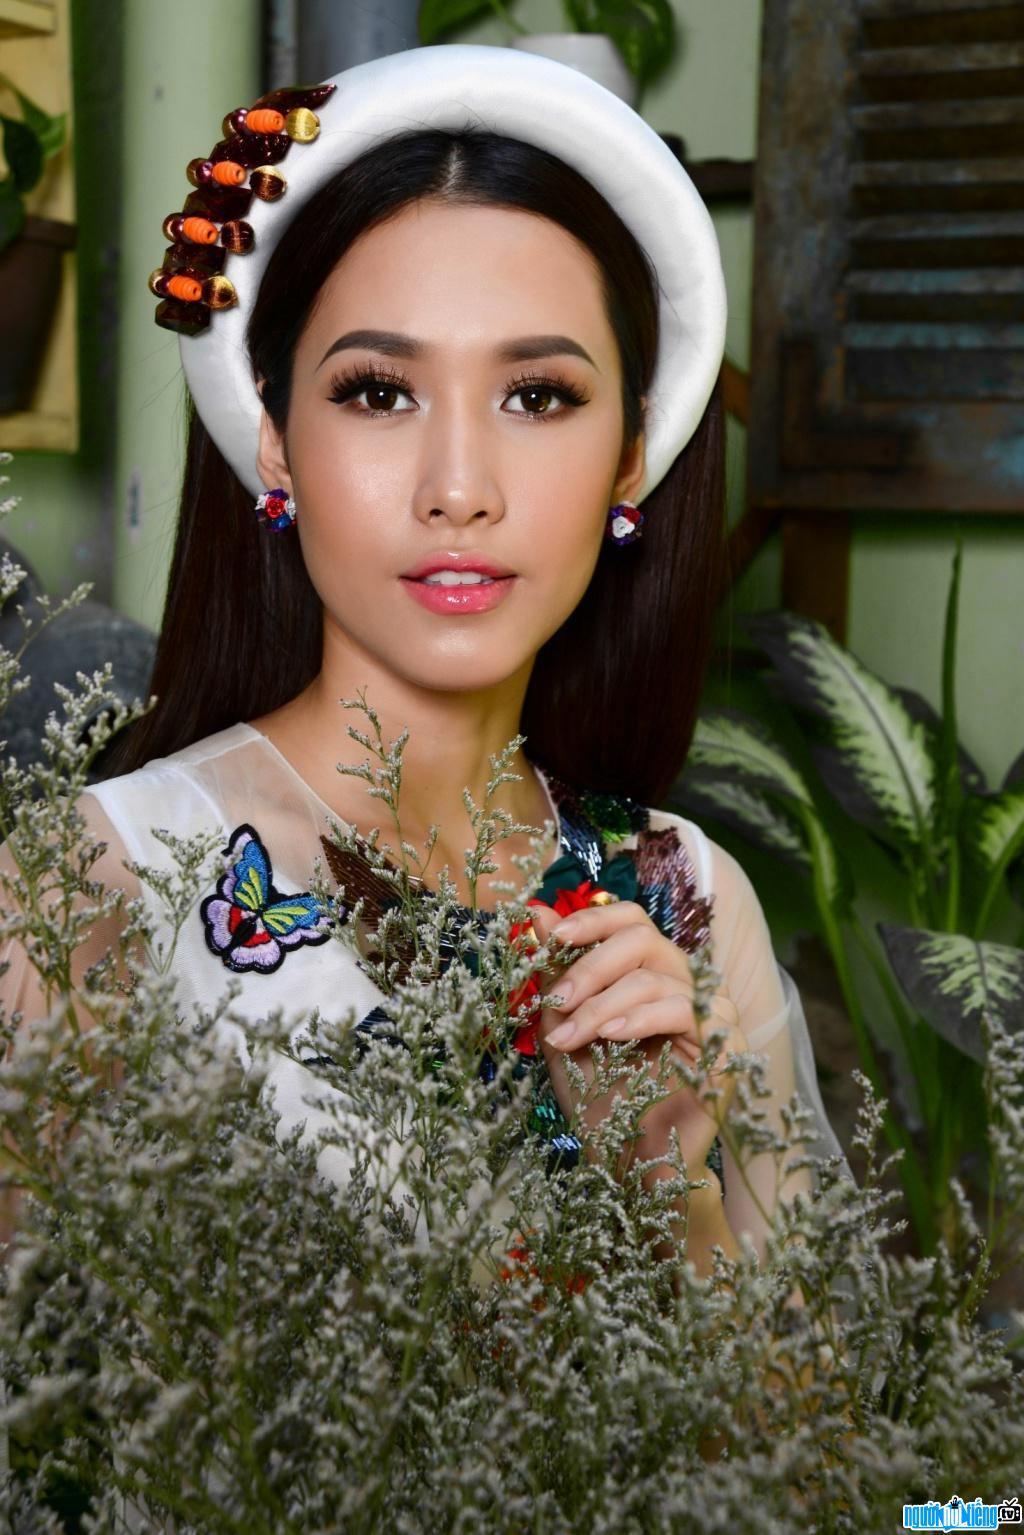  Miss Phan Thu Quyen's image is shy with flowers